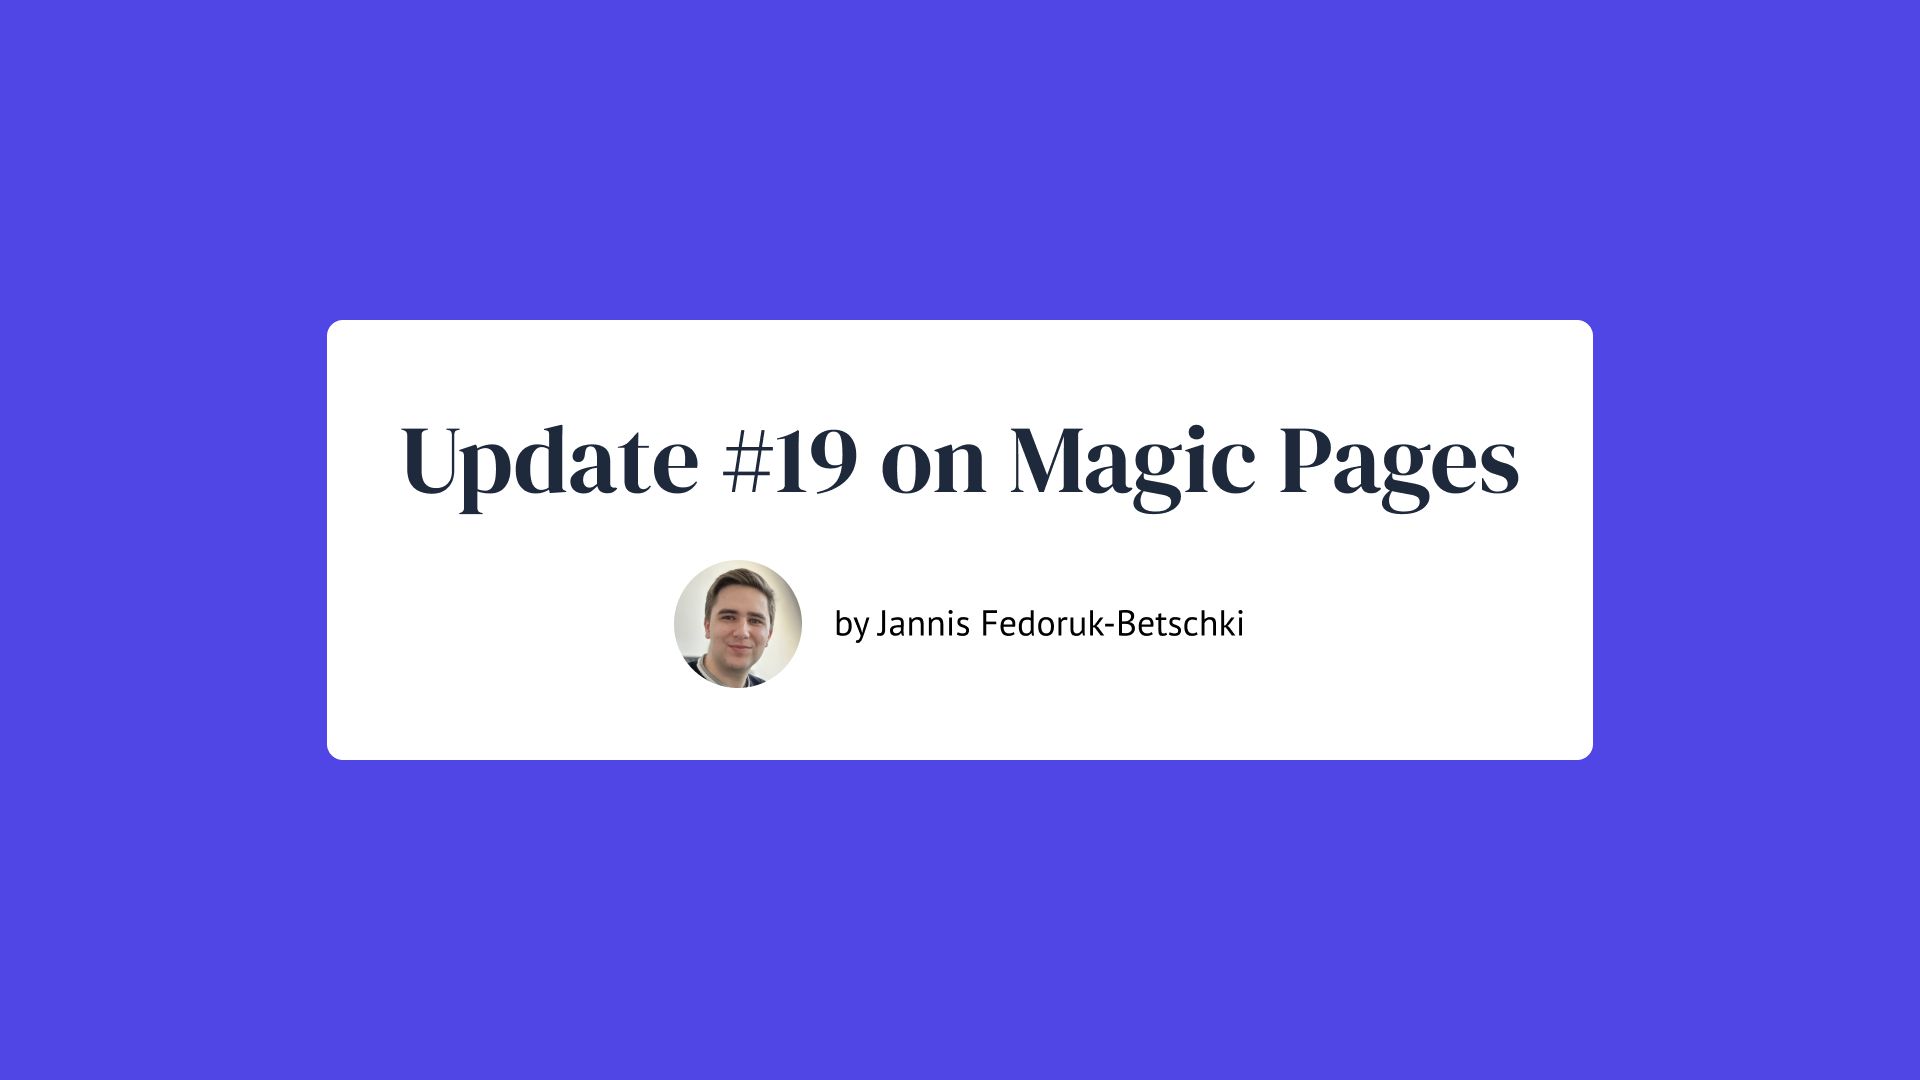 Update #19 on Magic Pages by Jannis Fedoruk-Betschki